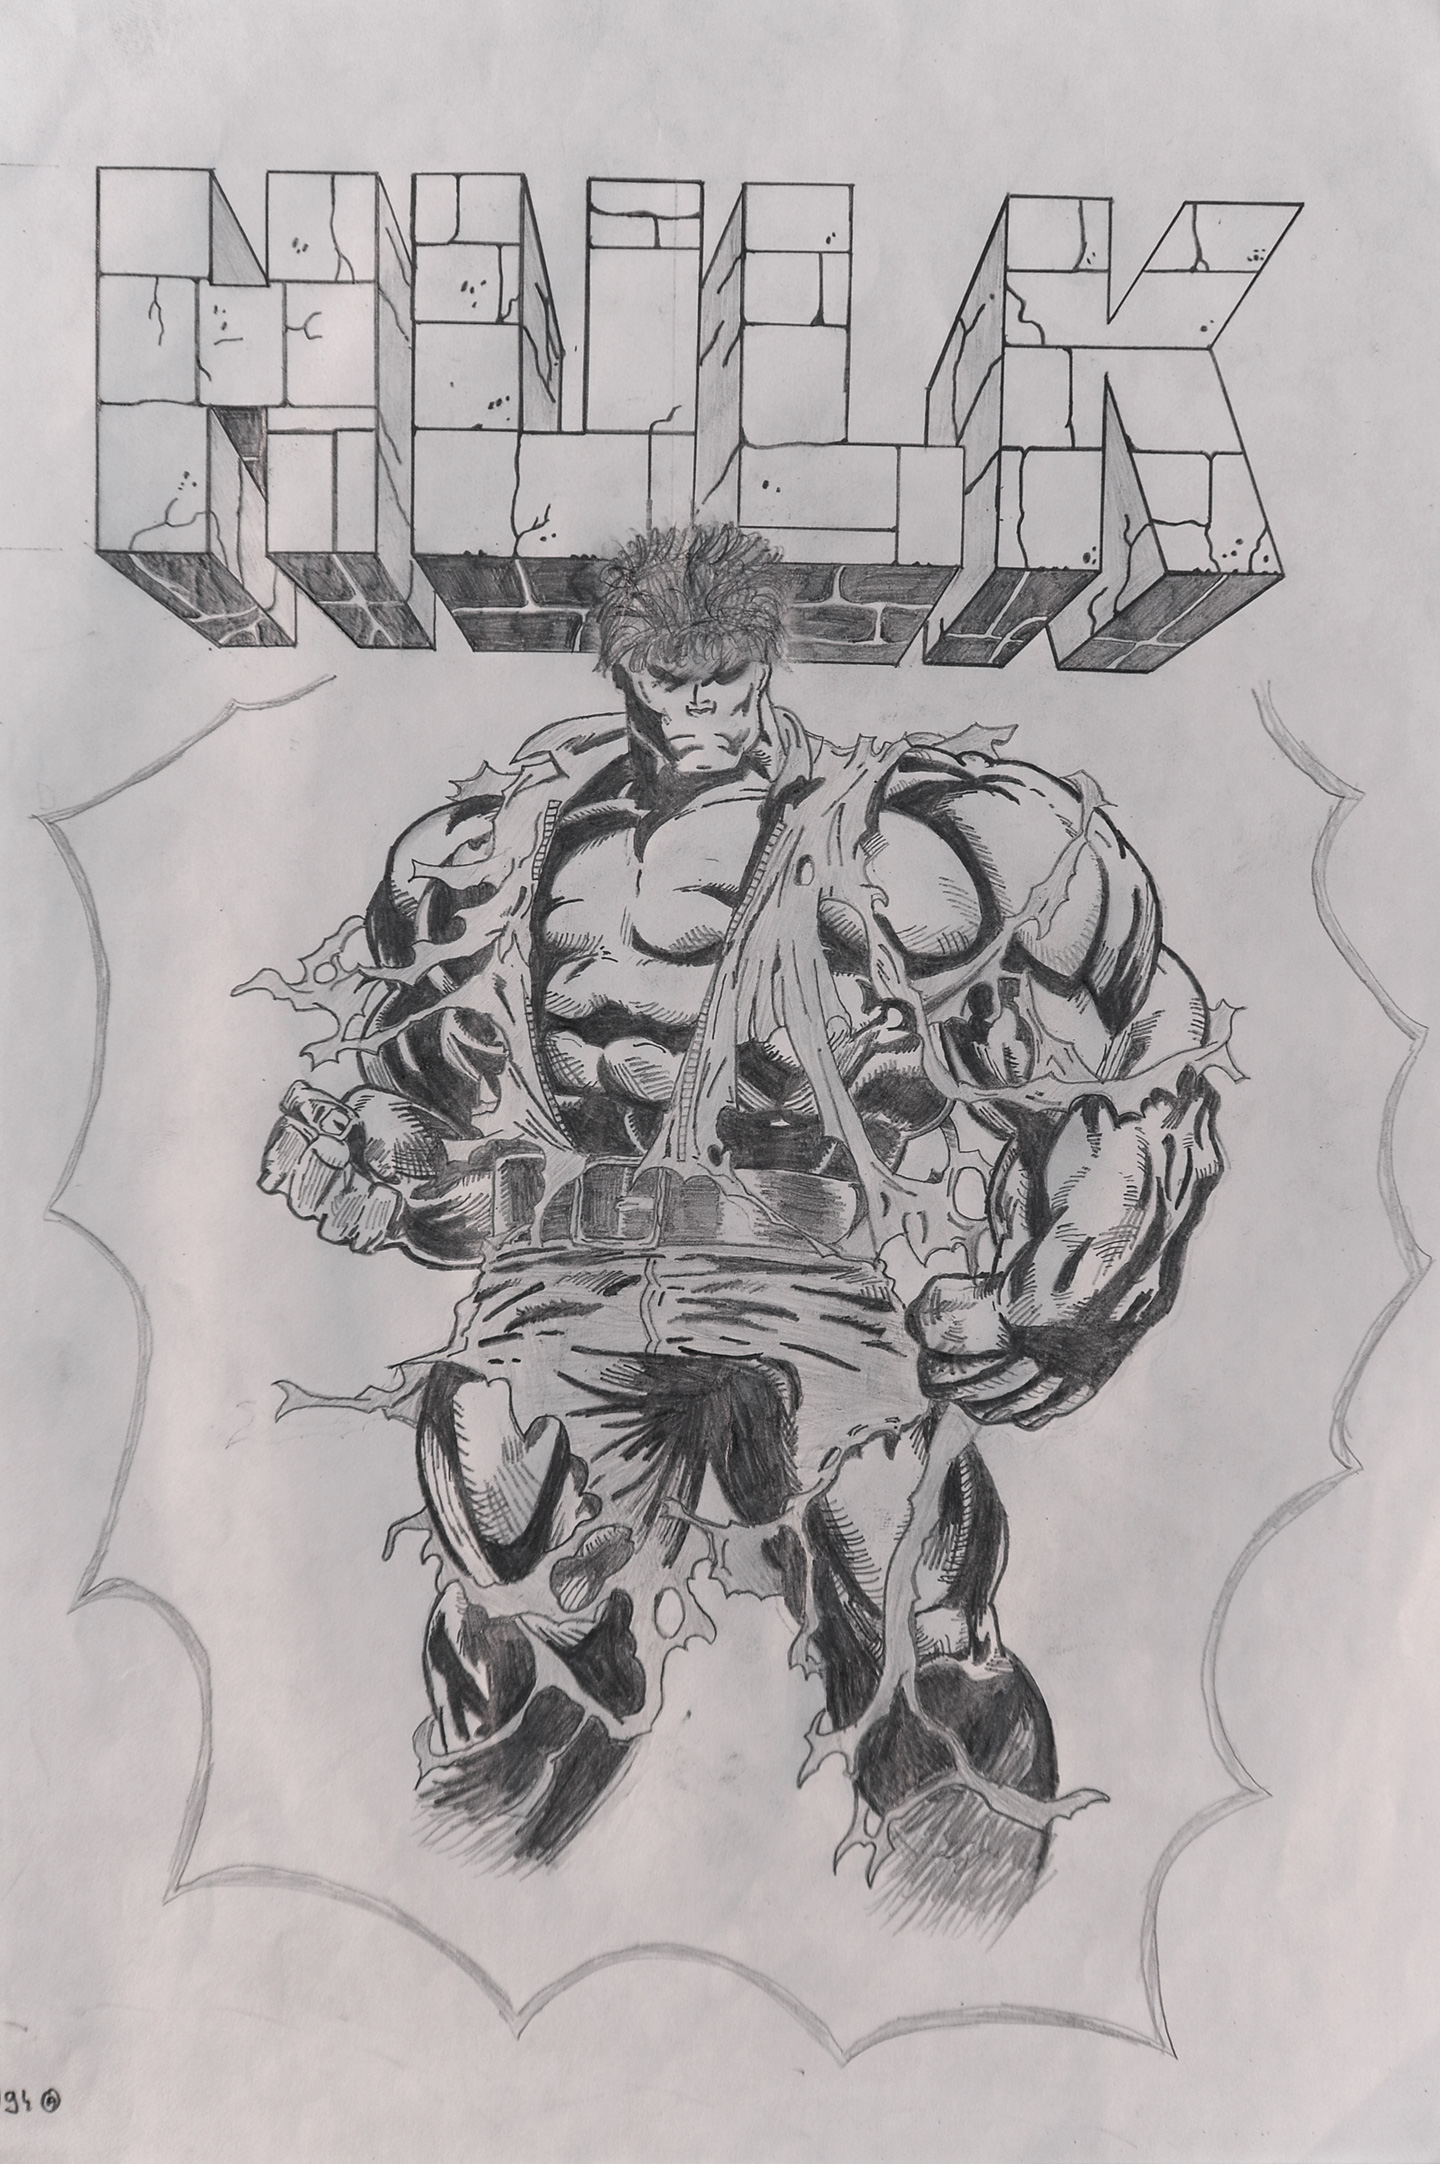 A black and white drawing of The Hulk from Marvel Comics